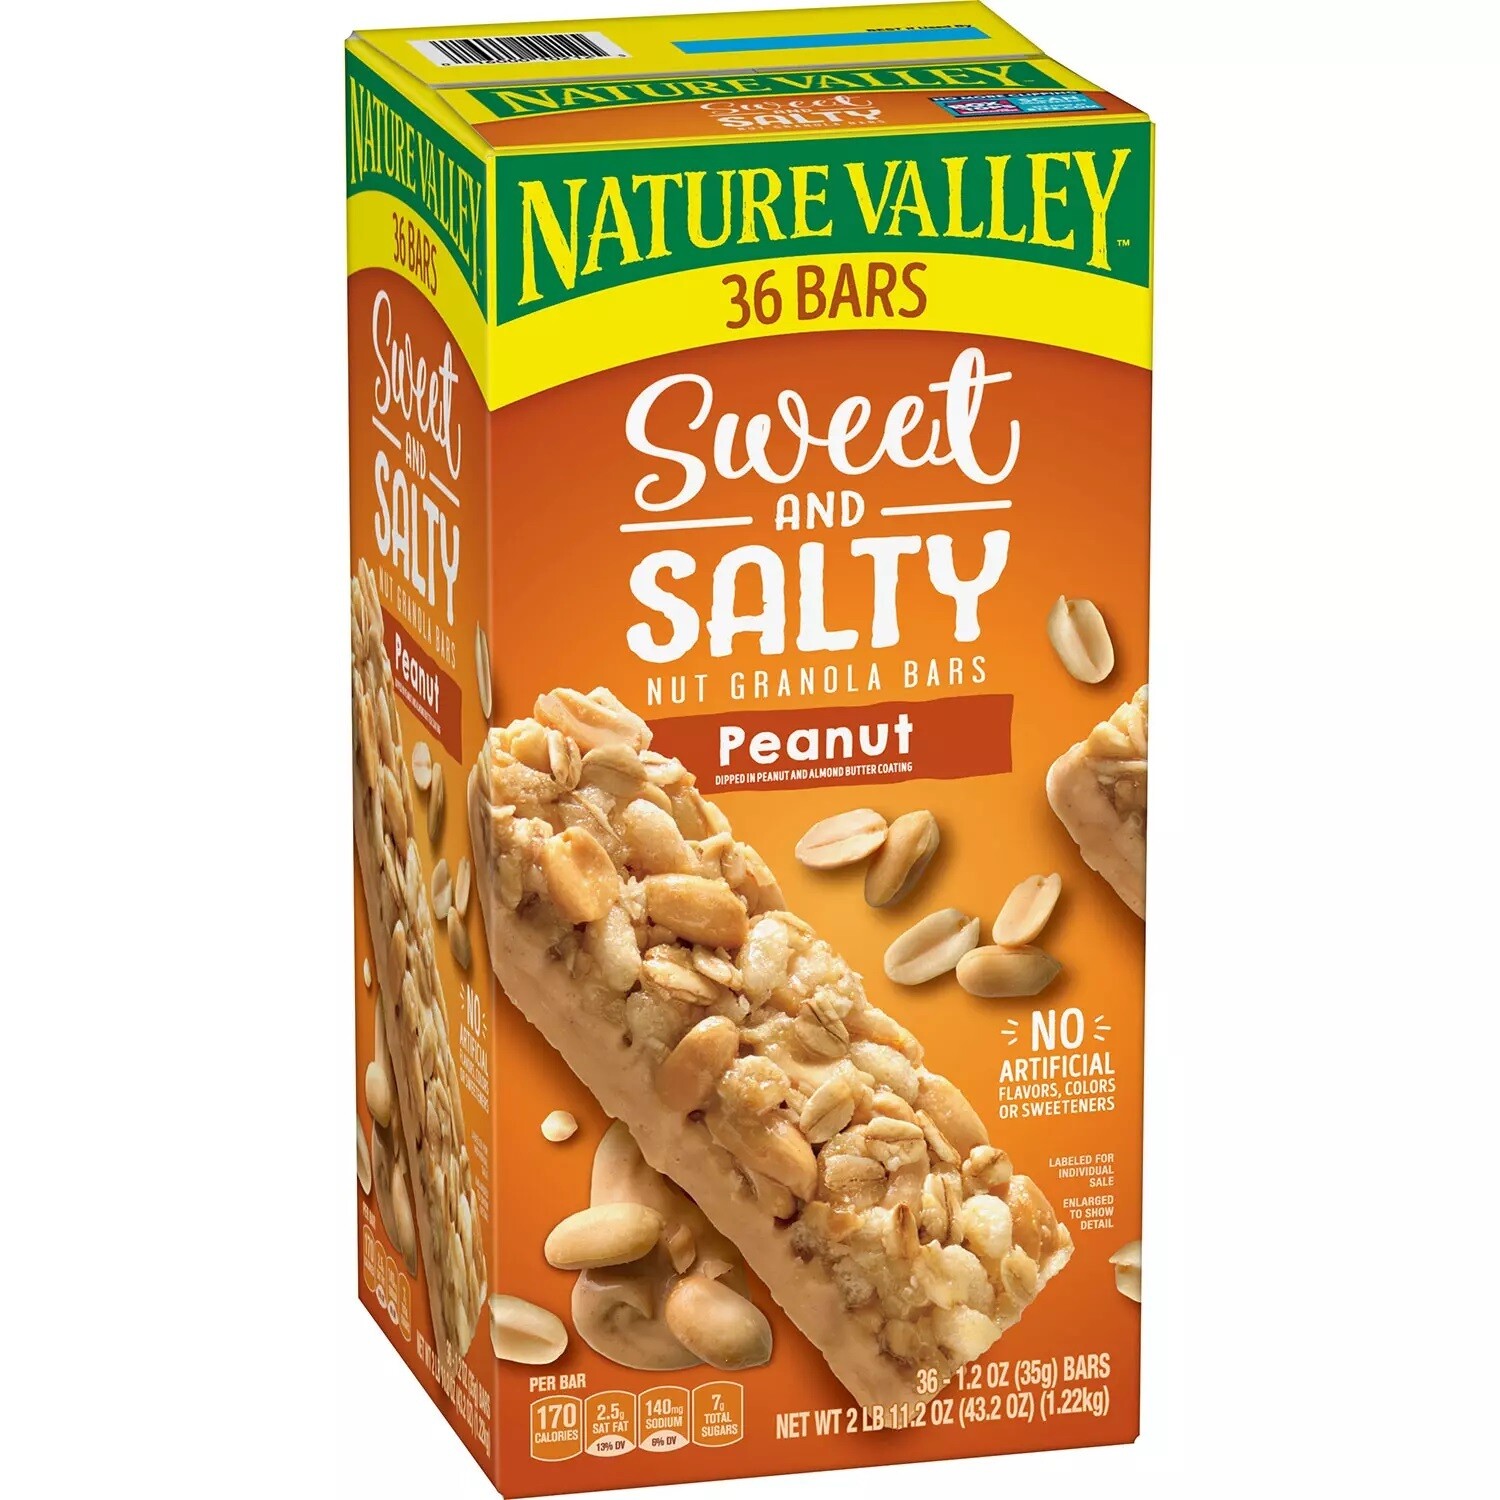 Nature Valley Sweet and Salty Peanut Granola Bars 48ct